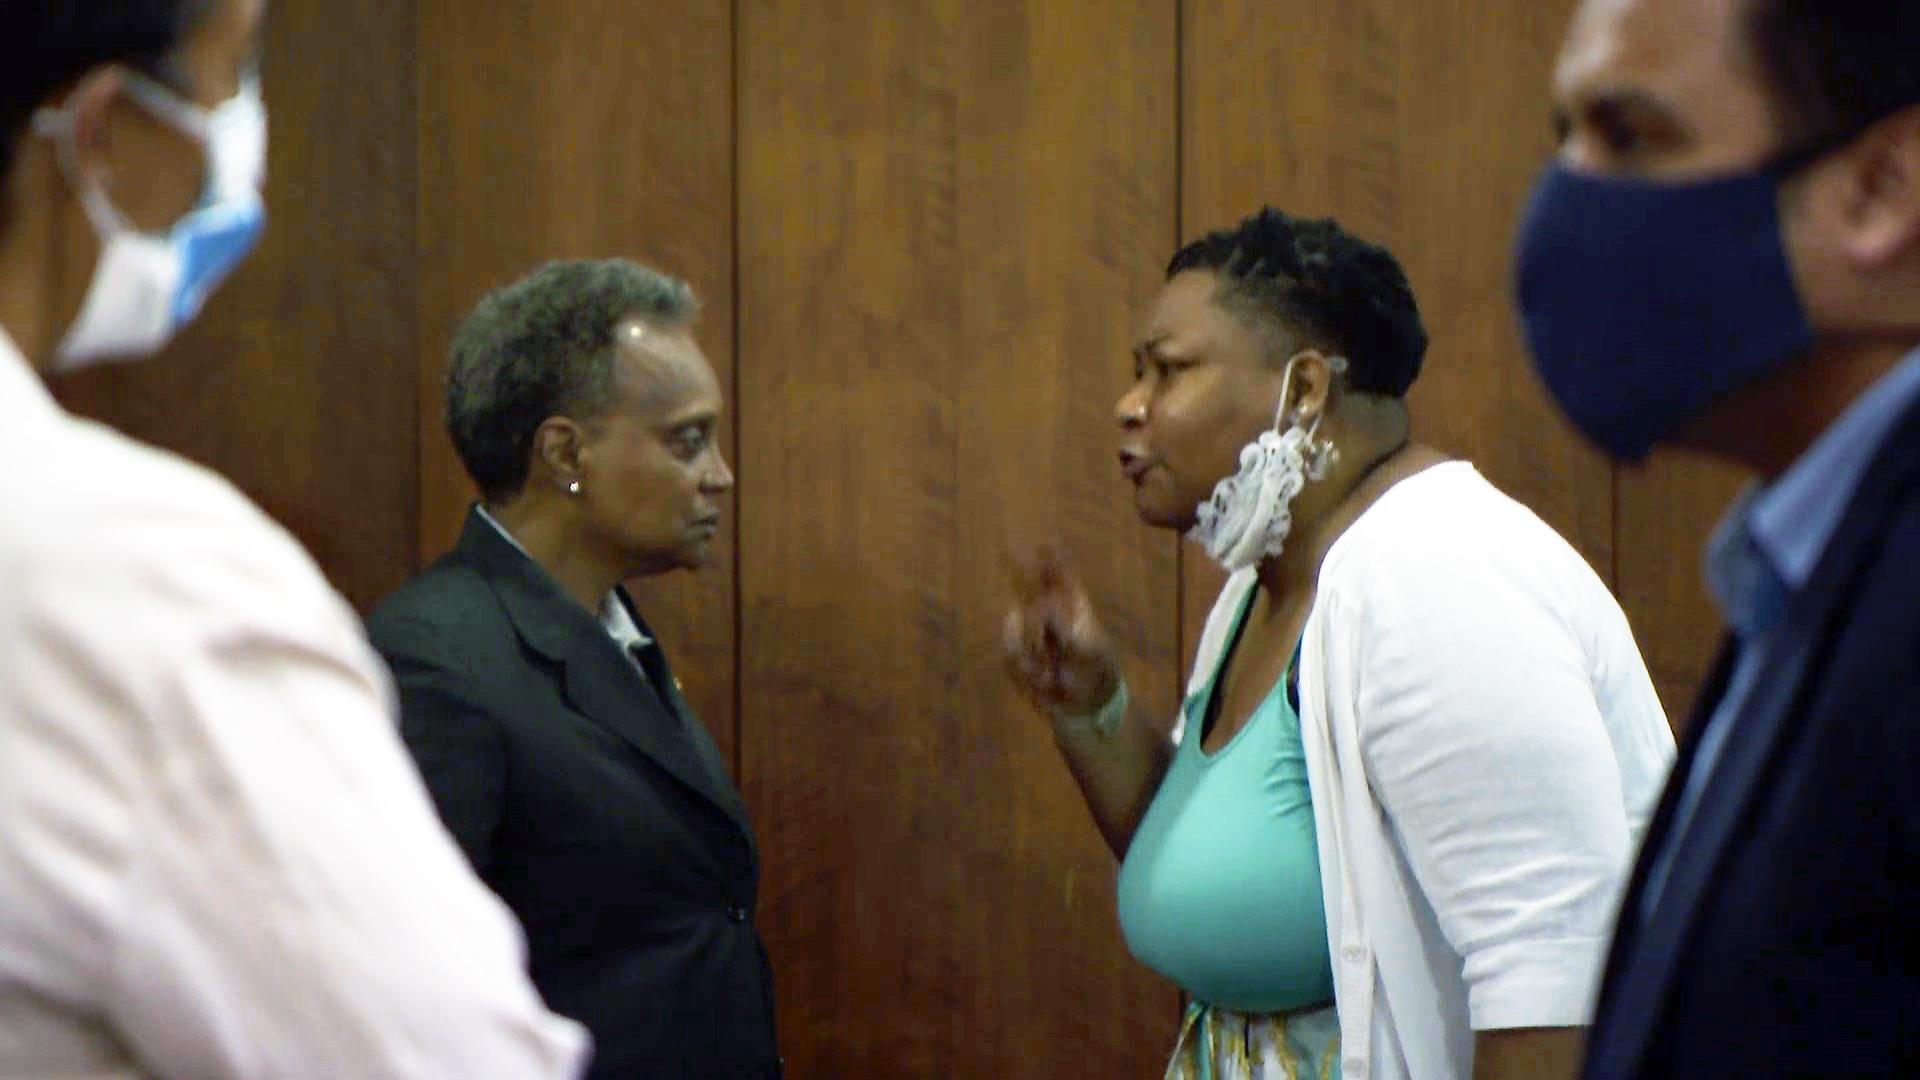 Mayor Lori Lightfoot, left, listens as Ald. Jeanette Taylor (20th Ward) responds to her request to allow the Chicago City Council to vote to confirm Celia Meza as the city’s top lawyer at a City Council meeting Wednesday, June 23, 2021. (WTTW News)